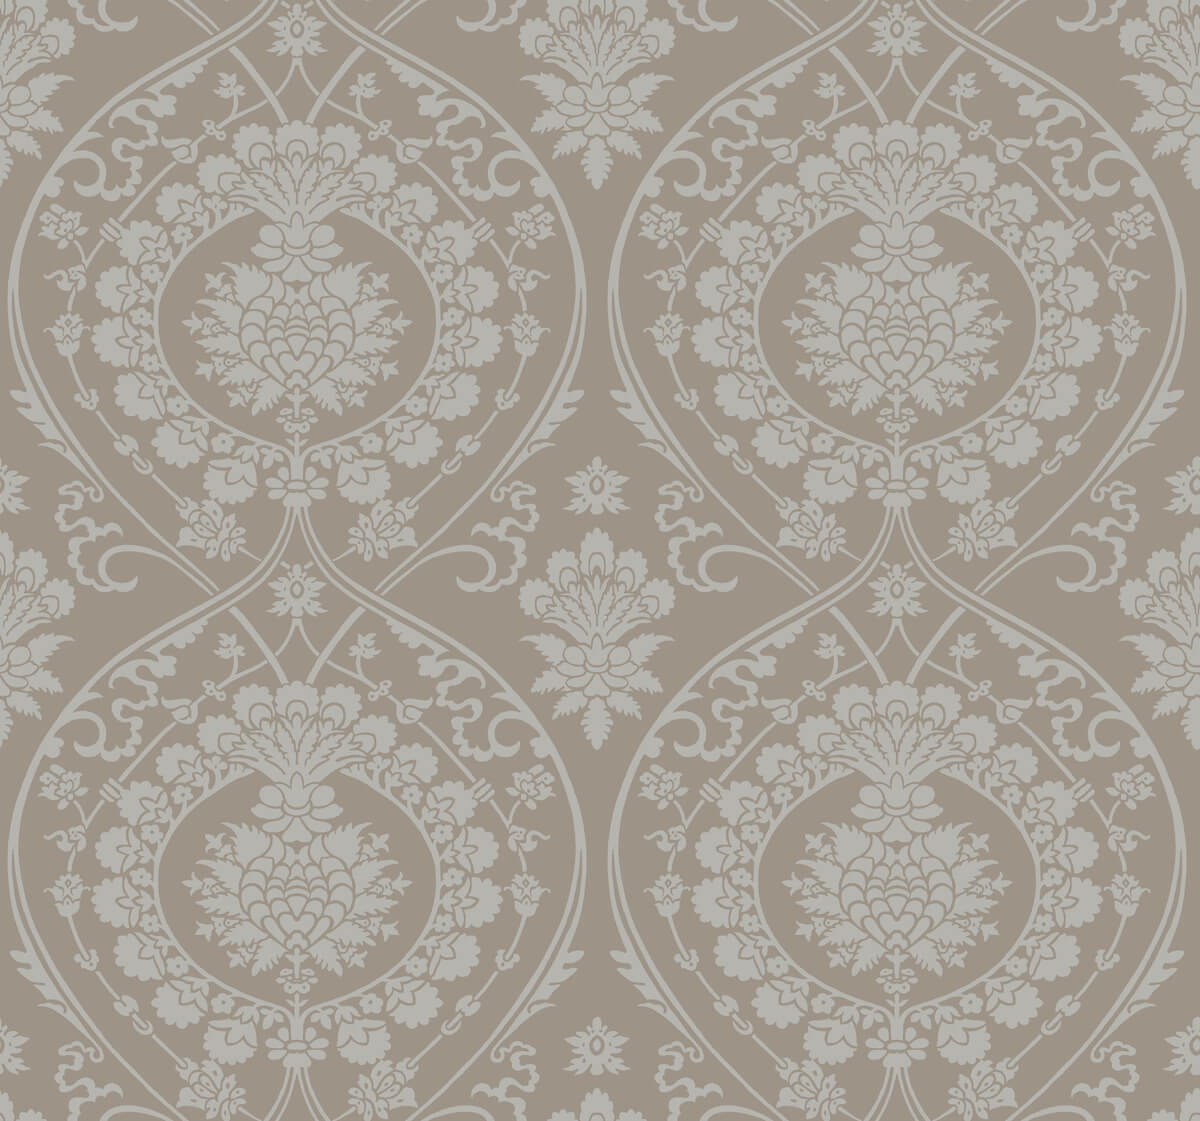 Damask Resource Library Imperial Damask Wallpaper - Beige & Silver